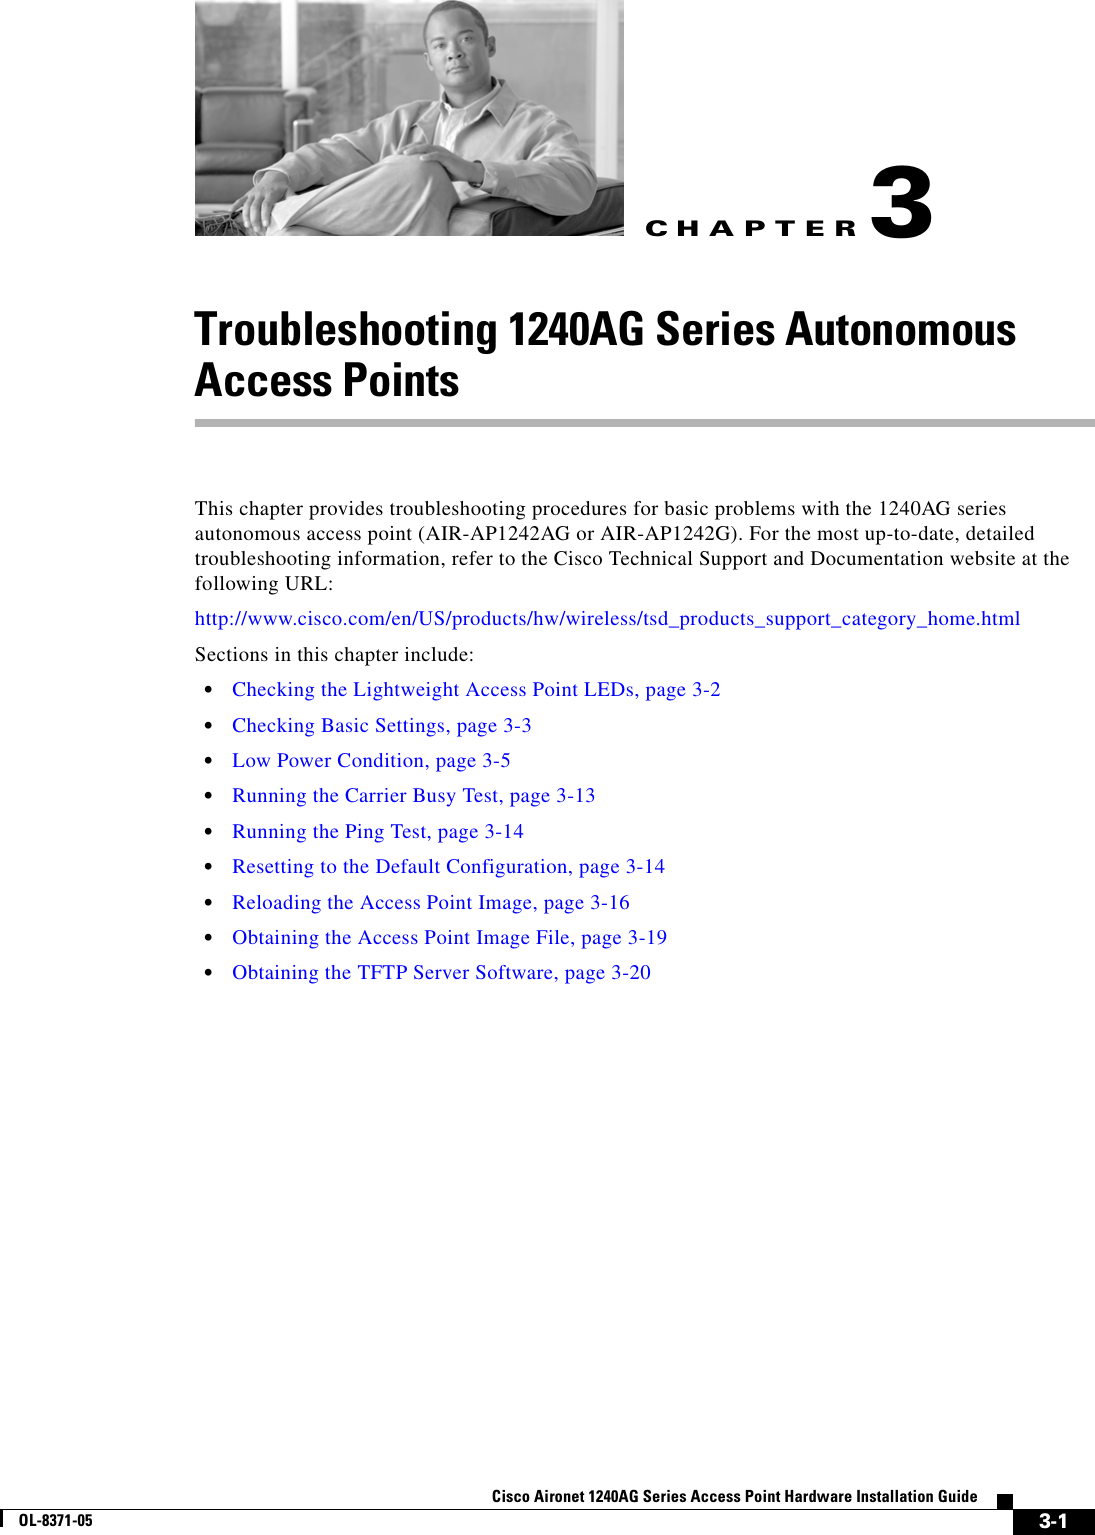 CHAPTER 3-1Cisco Aironet 1240AG Series Access Point Hardware Installation GuideOL-8371-053Troubleshooting 1240AG Series Autonomous Access PointsThis chapter provides troubleshooting procedures for basic problems with the 1240AG series autonomous access point (AIR-AP1242AG or AIR-AP1242G). For the most up-to-date, detailed troubleshooting information, refer to the Cisco Technical Support and Documentation website at the following URL:http://www.cisco.com/en/US/products/hw/wireless/tsd_products_support_category_home.htmlSections in this chapter include:•Checking the Lightweight Access Point LEDs, page 3-2•Checking Basic Settings, page 3-3•Low Power Condition, page 3-5•Running the Carrier Busy Test, page 3-13•Running the Ping Test, page 3-14•Resetting to the Default Configuration, page 3-14•Reloading the Access Point Image, page 3-16•Obtaining the Access Point Image File, page 3-19•Obtaining the TFTP Server Software, page 3-20